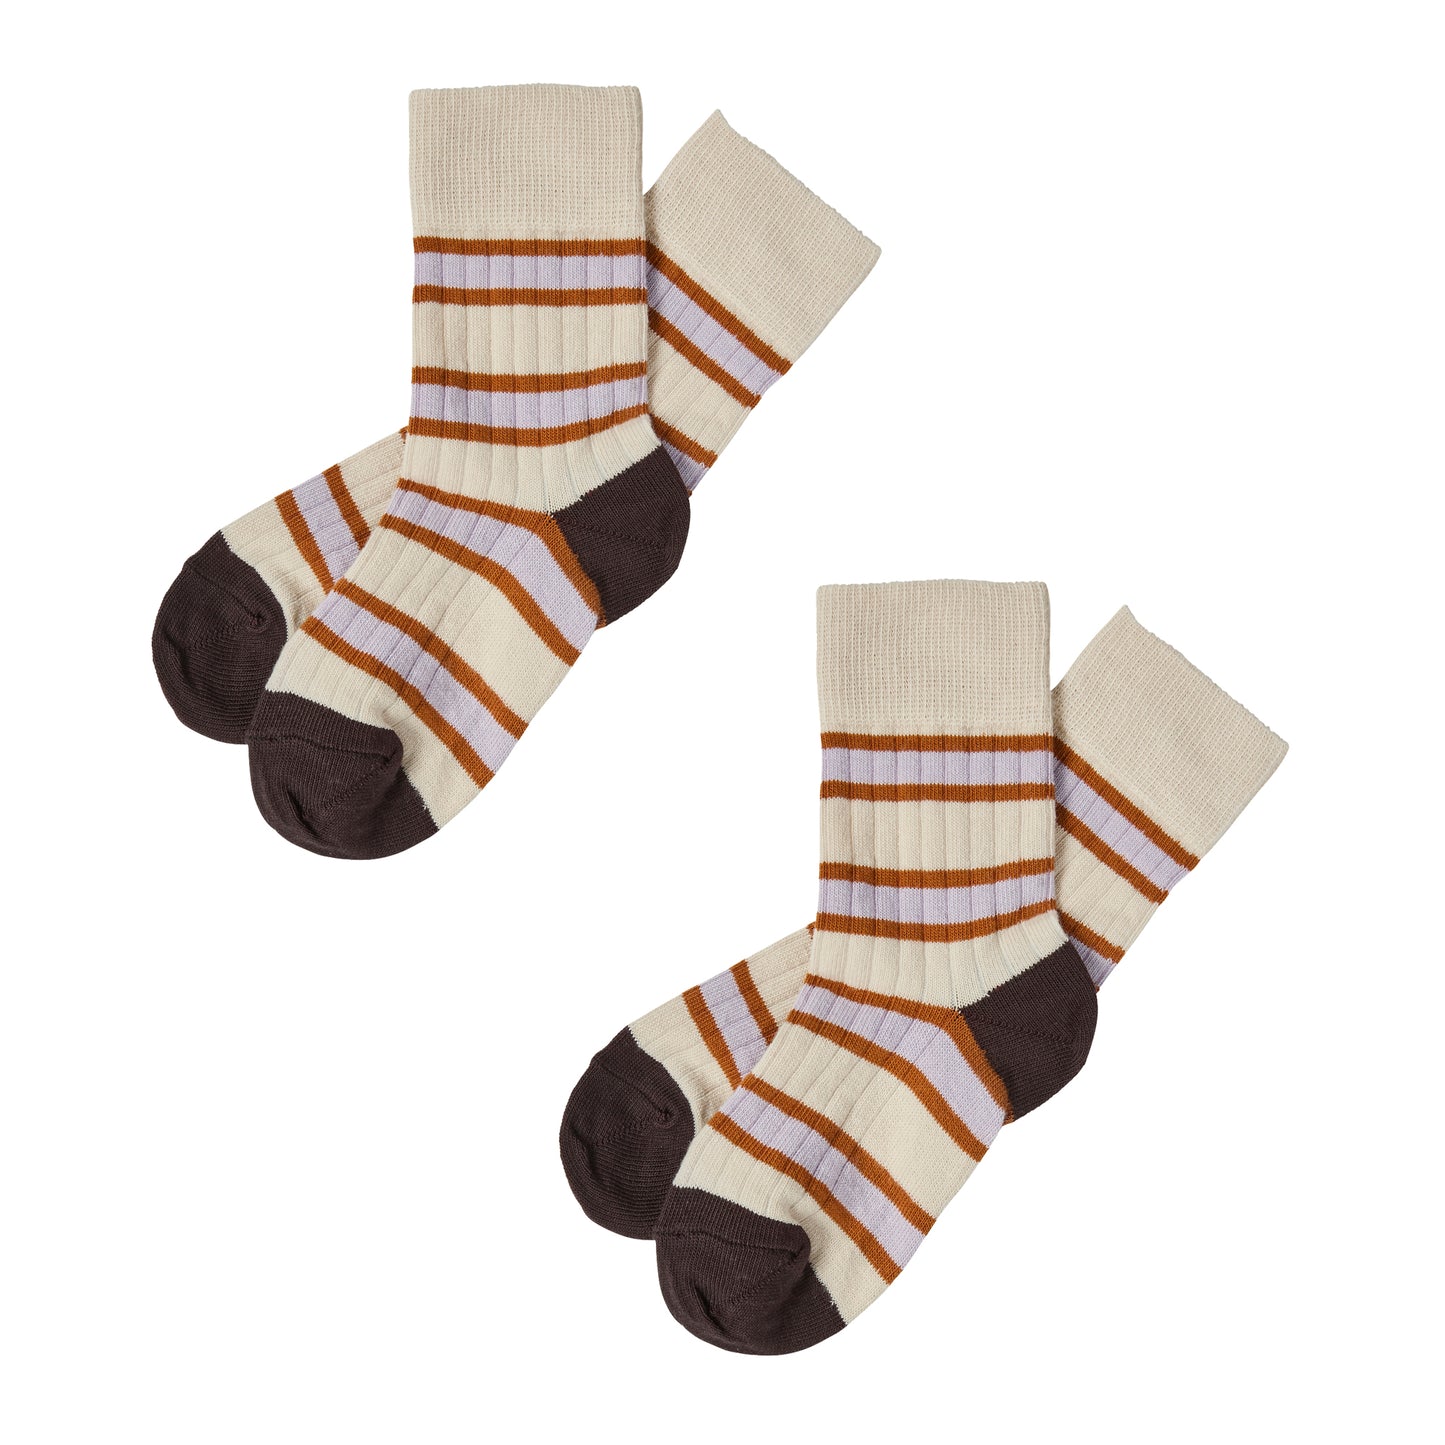 1 Pack Two Tone Striped Organic Cotton Socks Mulberry Heather